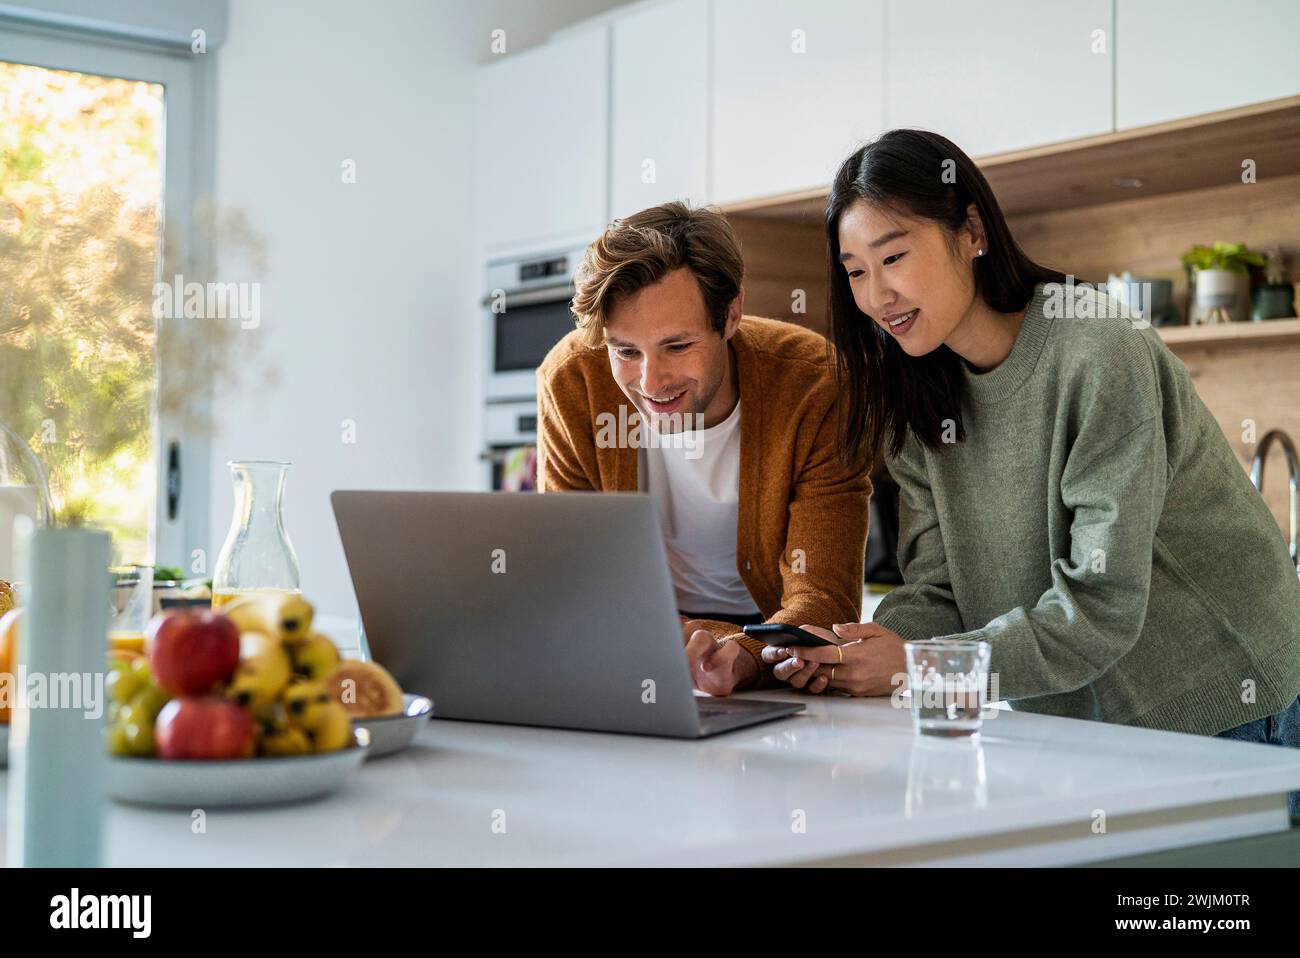 Adult couple shopping online on laptop and smart phone at kitchen counter Stock Photo